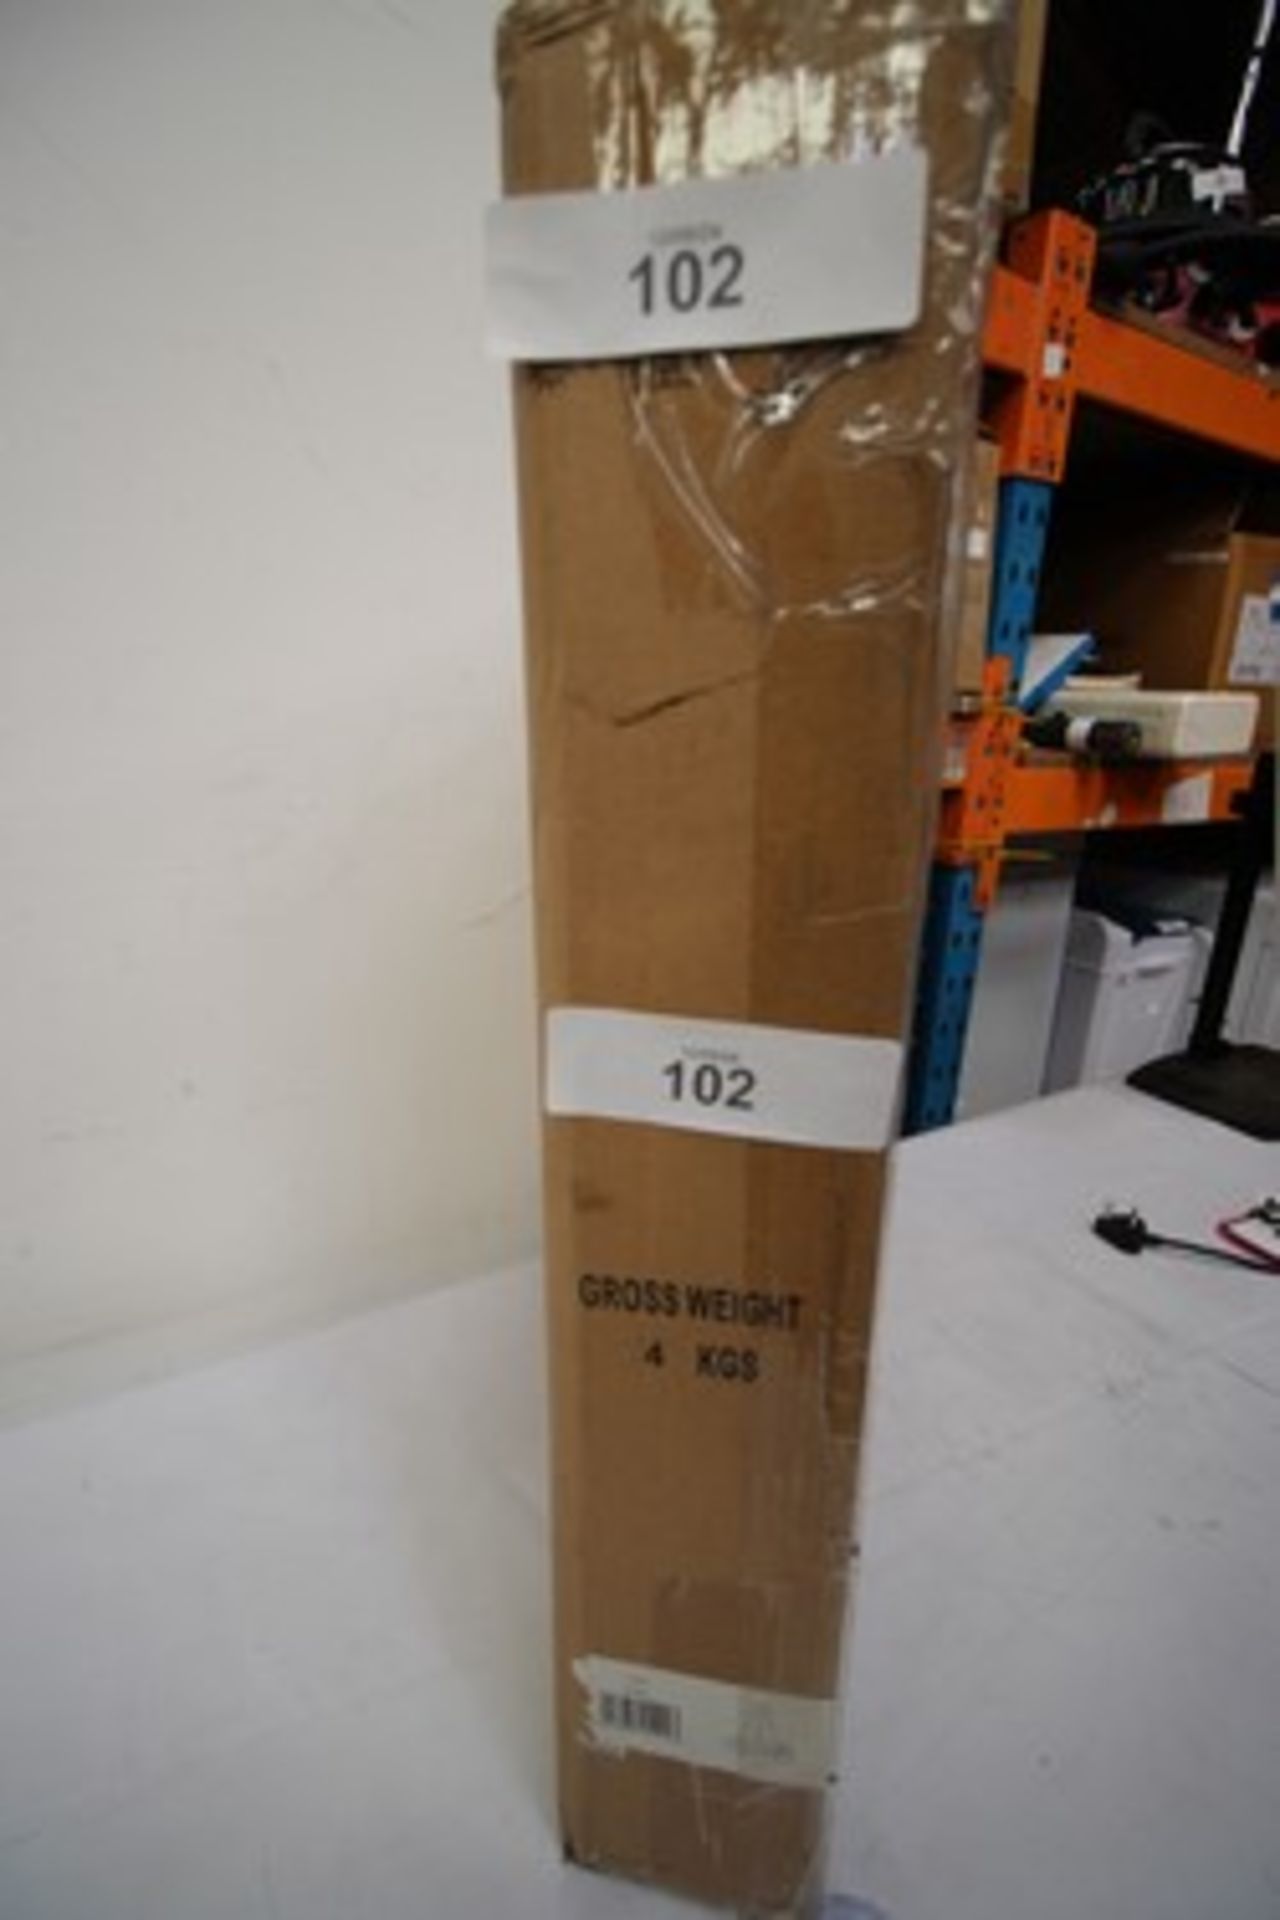 1 x Endon Attalea LED pendant light, gold and white, model No: 97631 - sealed new in box (ES9)